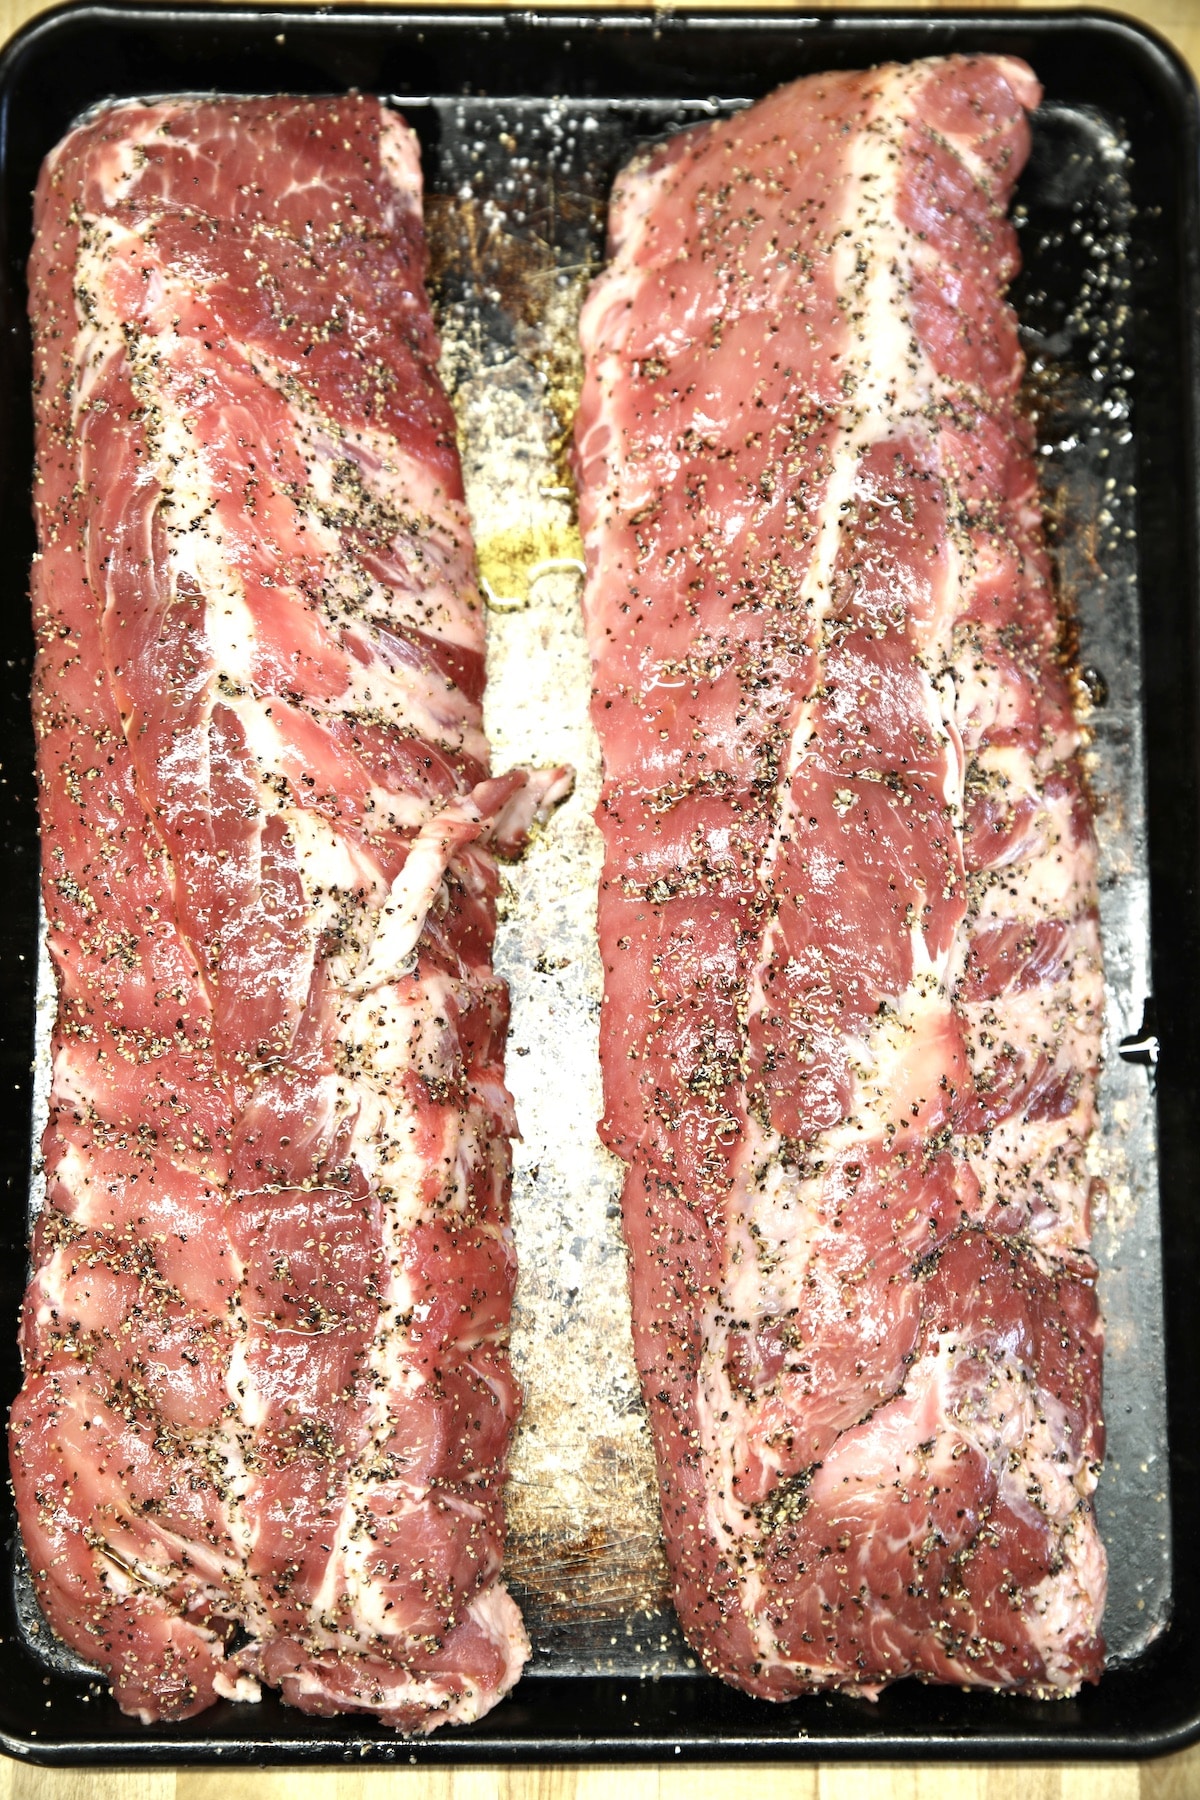 2 racks of baby back ribs - uncooked, with salt and pepper.